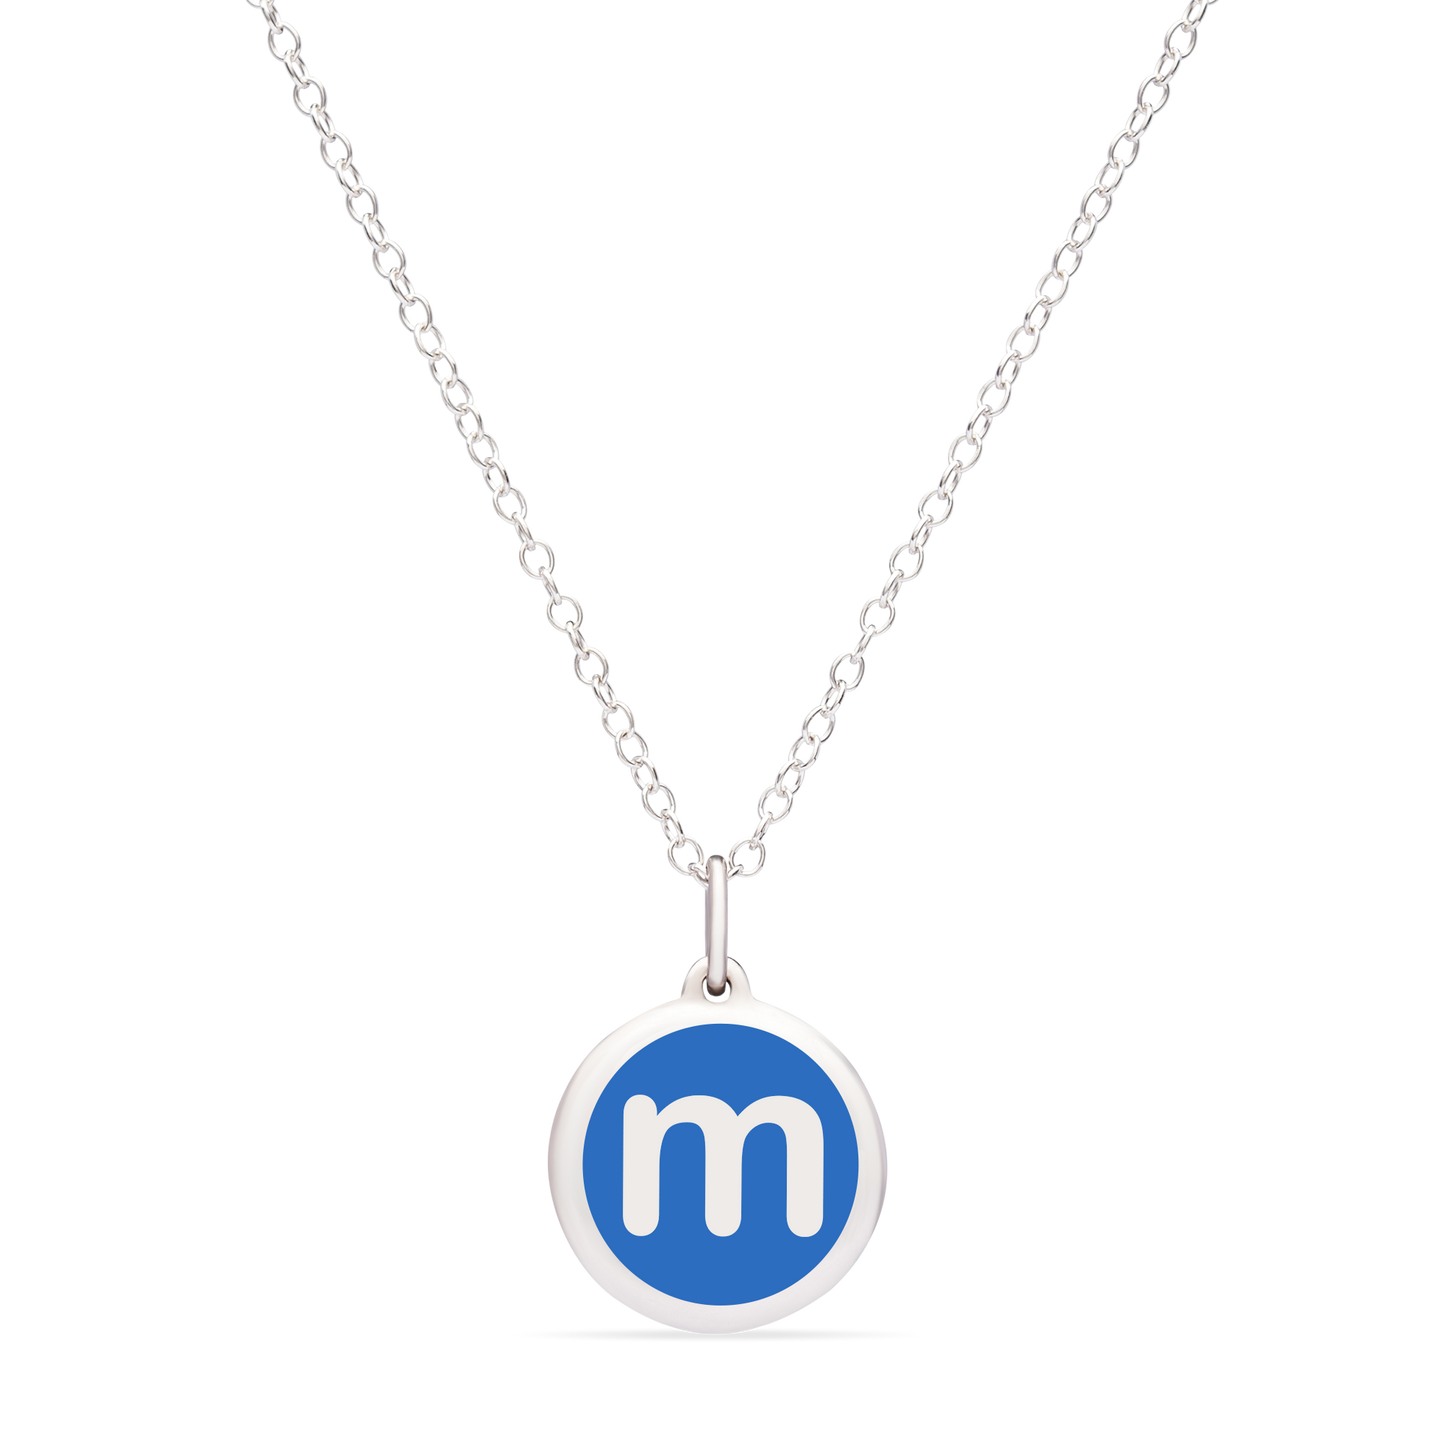 MINI INITIAL 'm' CHARM sterling silver with rhodium plate